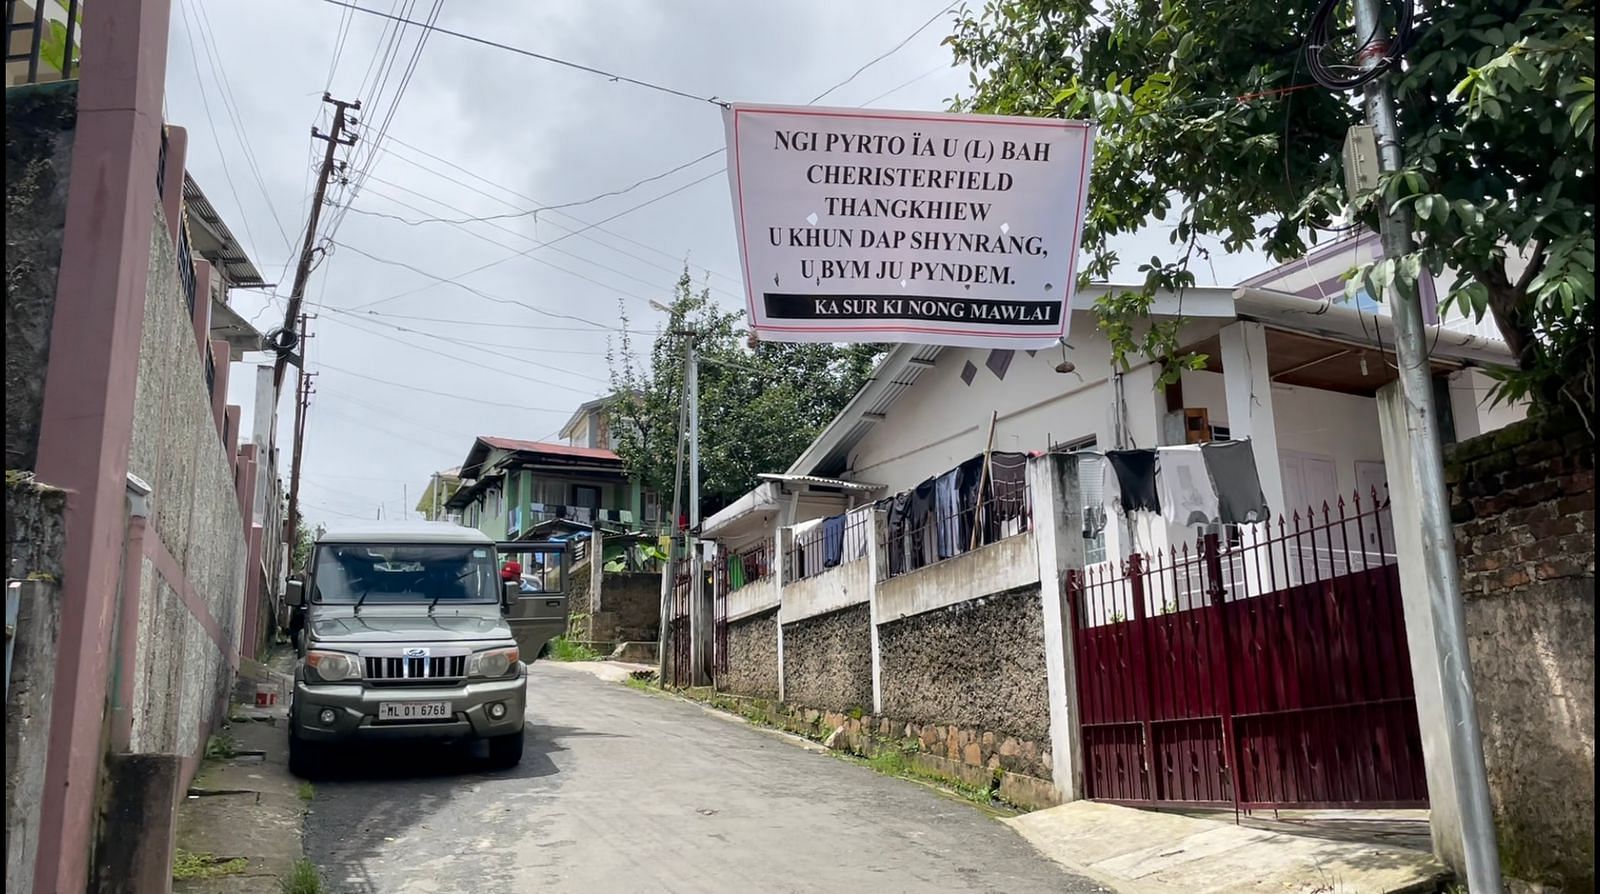 “We praise Bah Cherishterfield Thangkhiew, a brave son, who never bowed down” — a poster outside the former militant’s house. | Photo: Praveen Jain/ThePrint